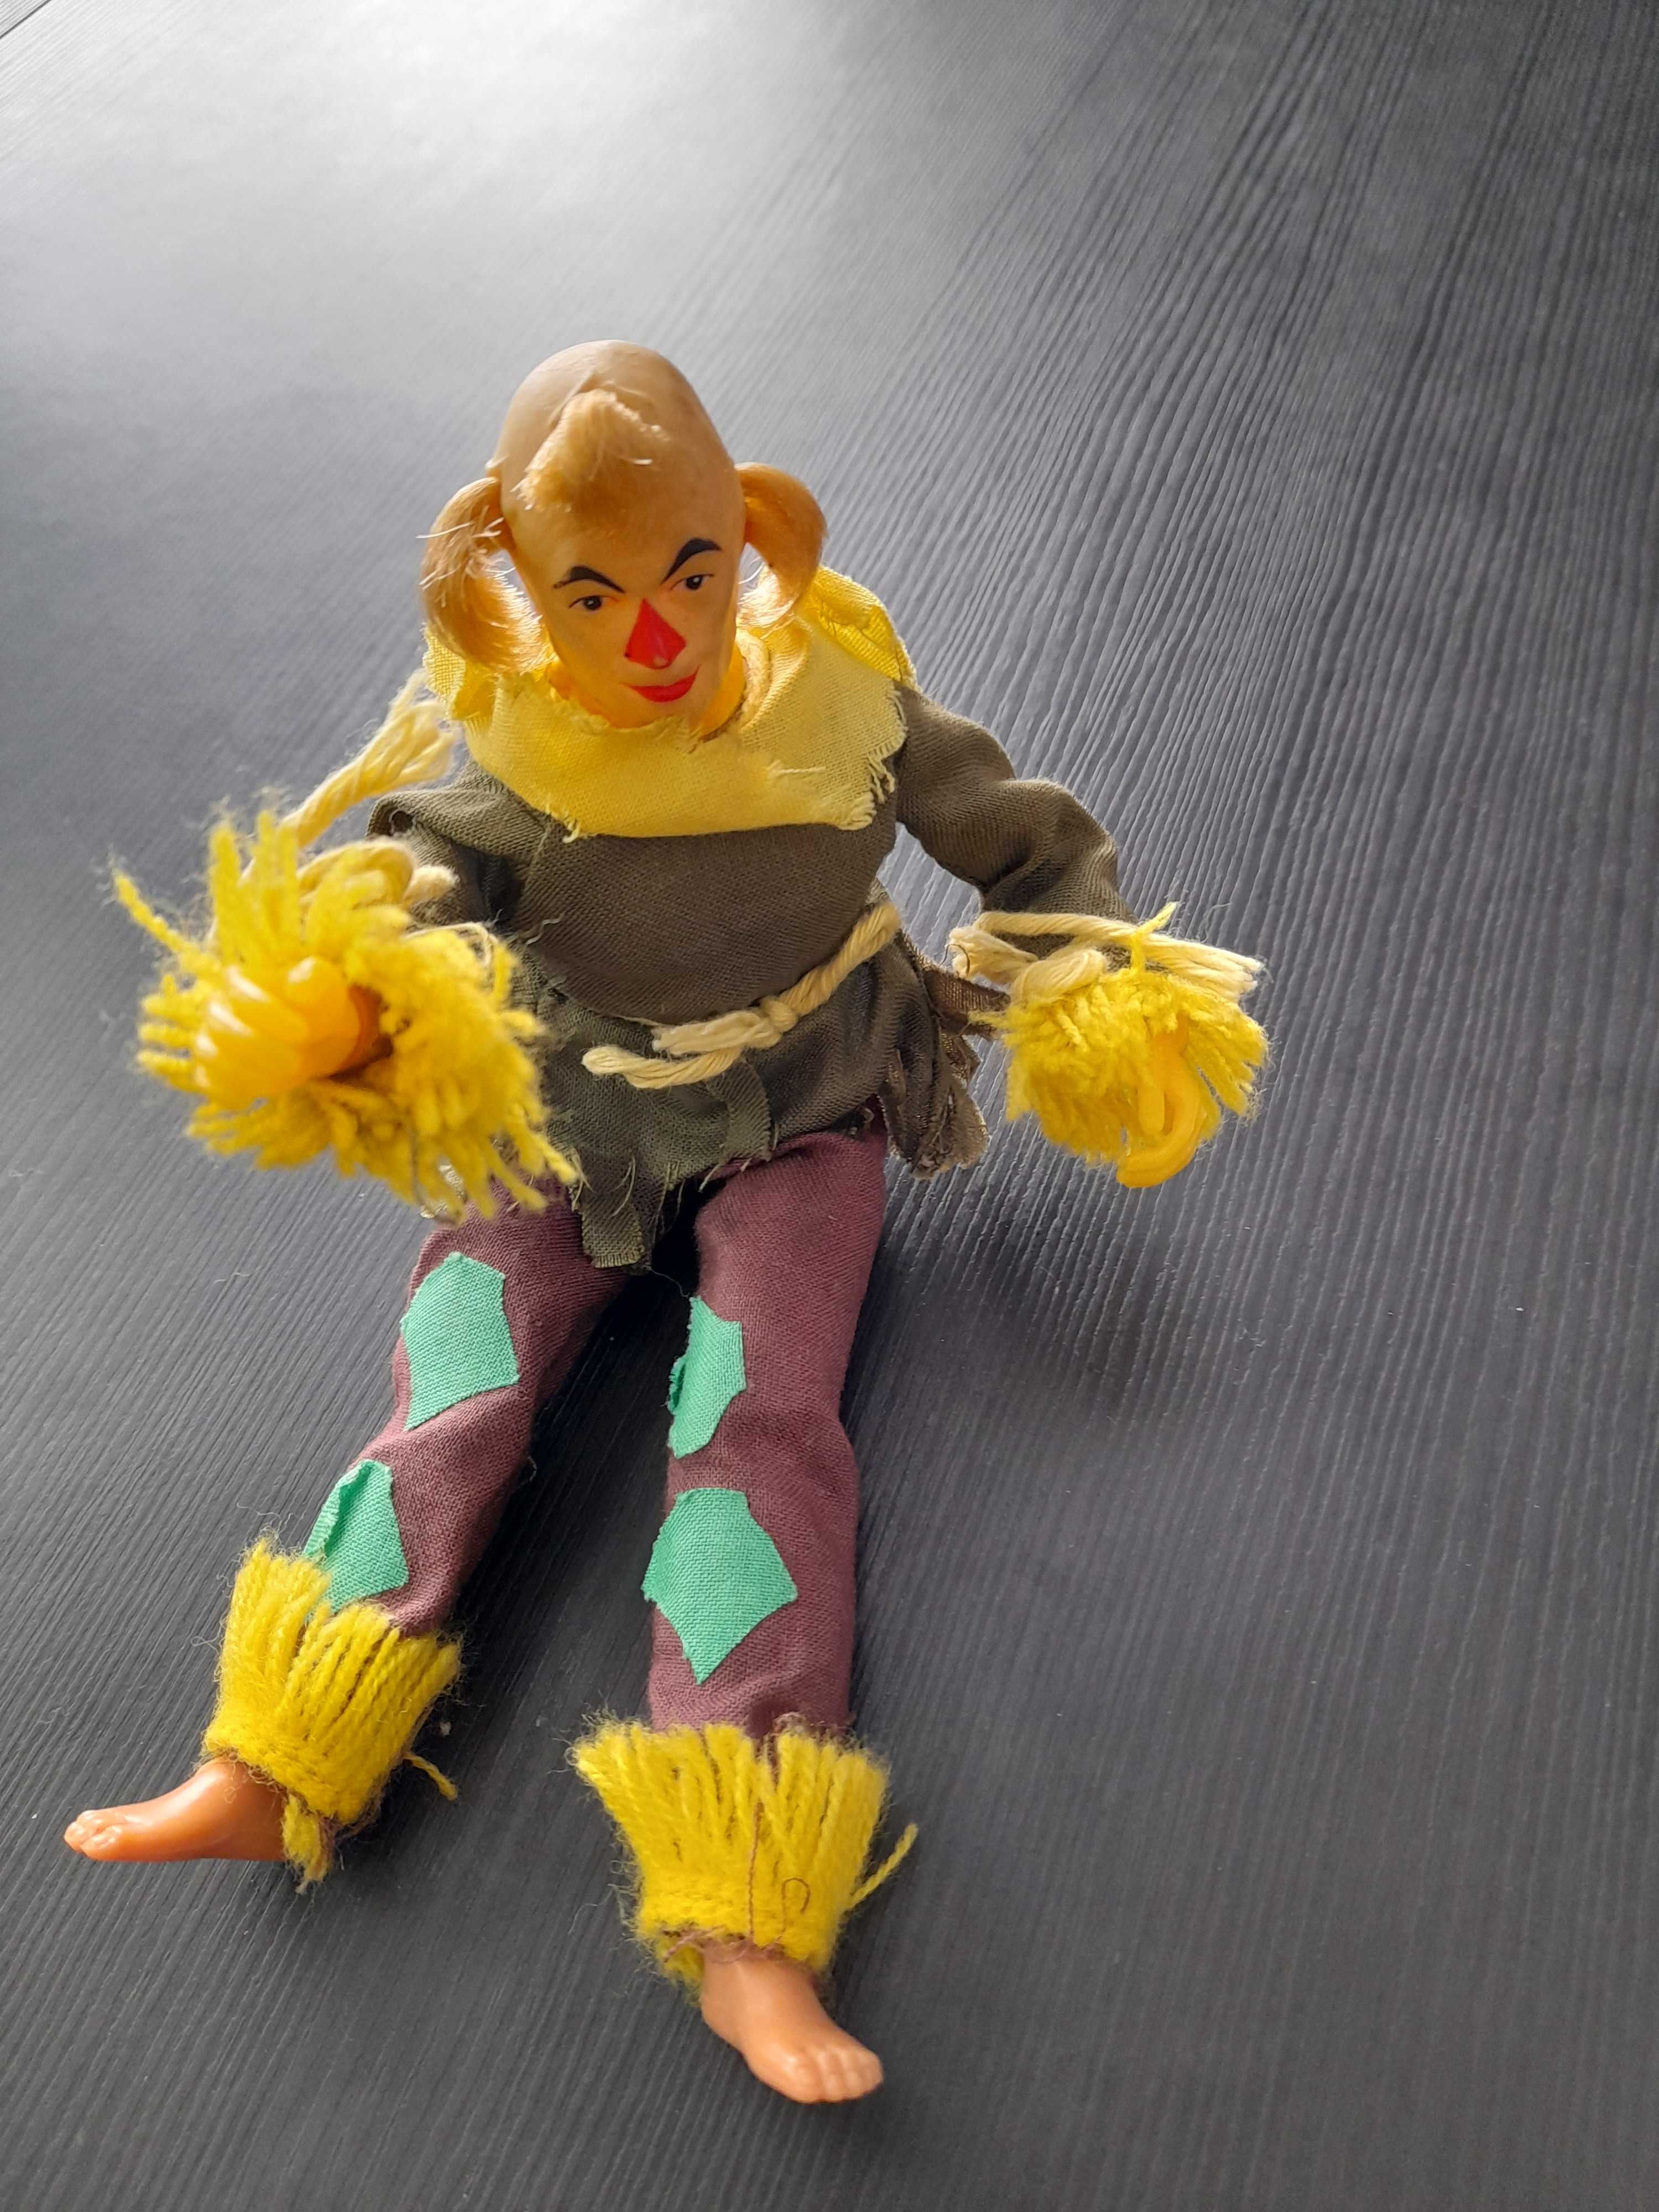 The Wizard of Oz Scarecrow 1970s MEGO action figure